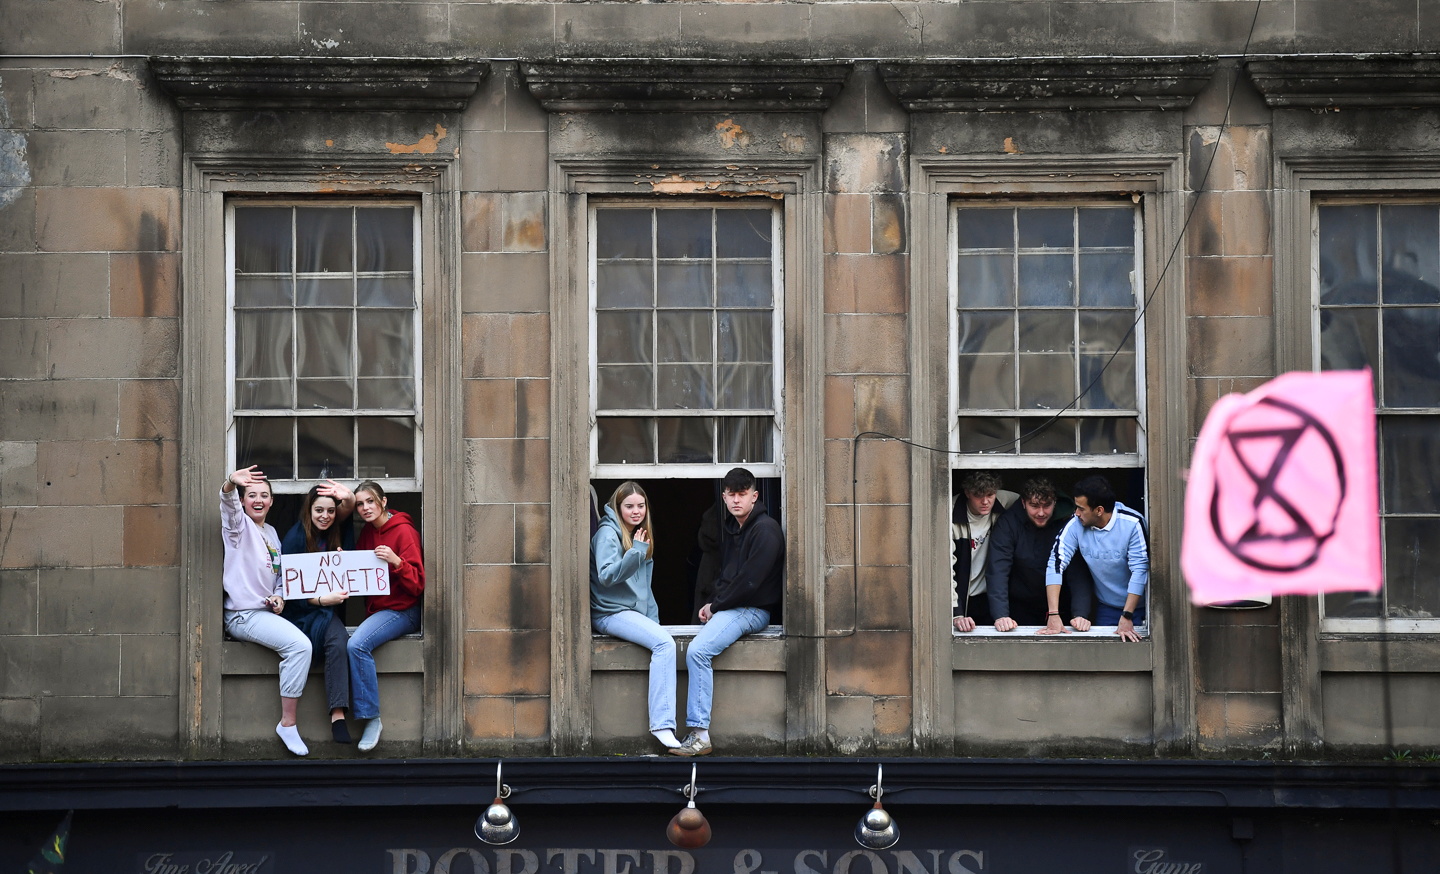 People sit in windows, of which some hold a placard, looking at the Fridays for Future march during the UN Climate Change Conference (COP26), in Glasgow, Scotland, Britain, November 5, 2021. REUTERS/Dylan Martinez